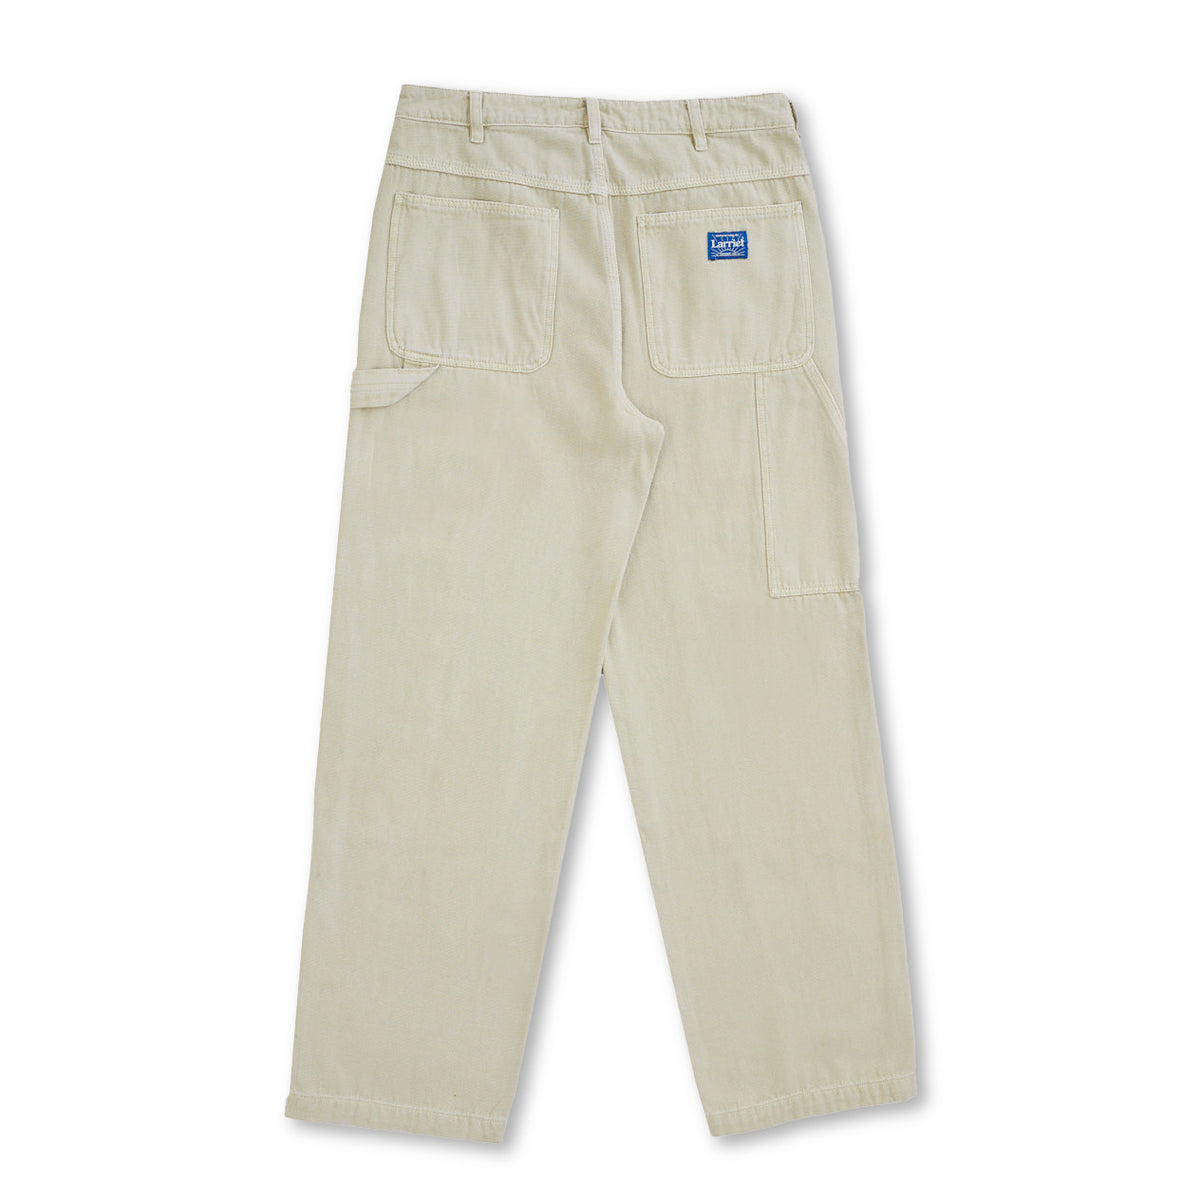 Double Knee Utility Pant - Natural